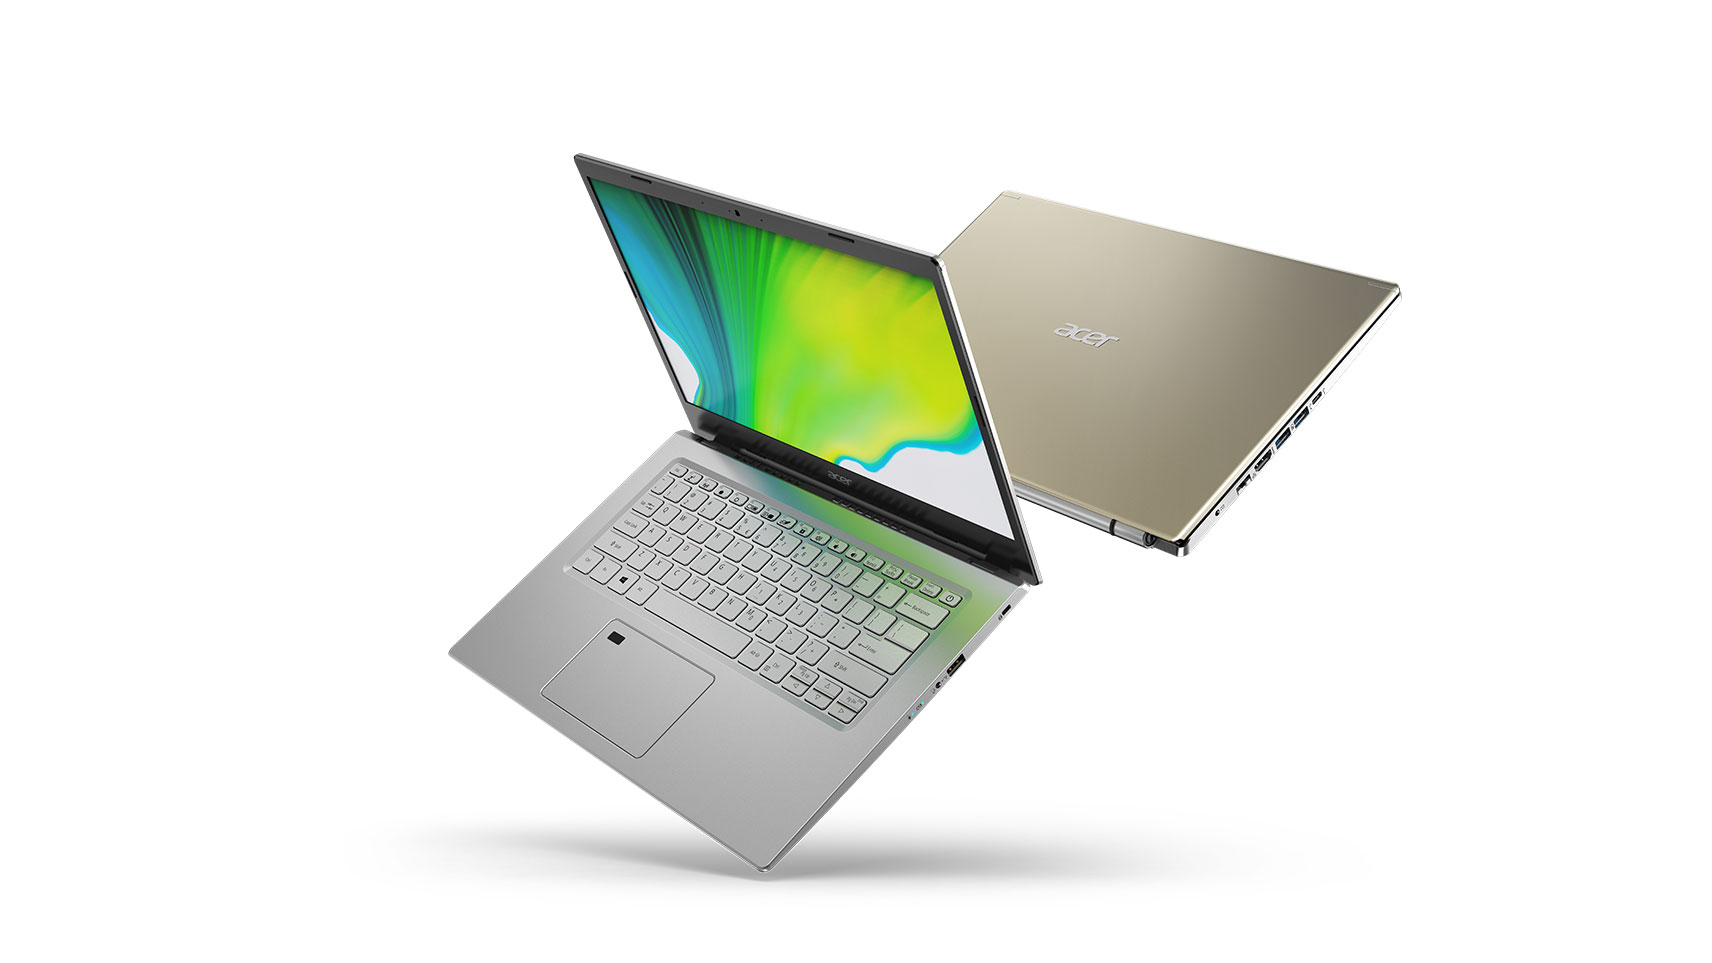 Acer Aspire 5 – A Serious Punch For The Price